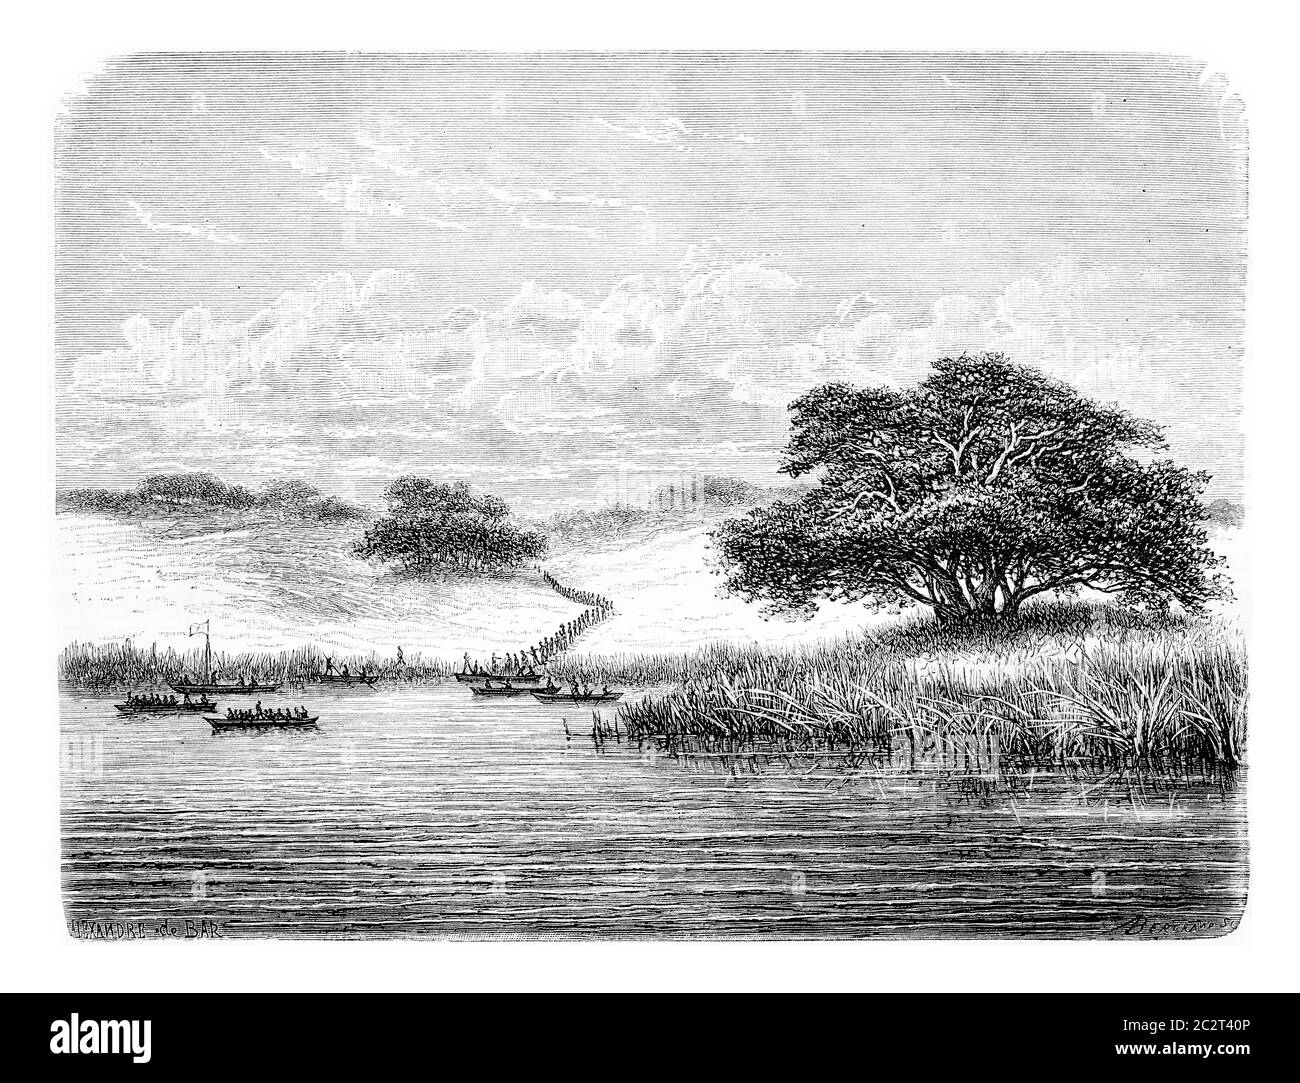 Crossing the Kwanza River, in Angola, Southern Africa, drawing by De Bar based on the English edition, vintage illustration. Le Tour du Monde, Travel Stock Photo